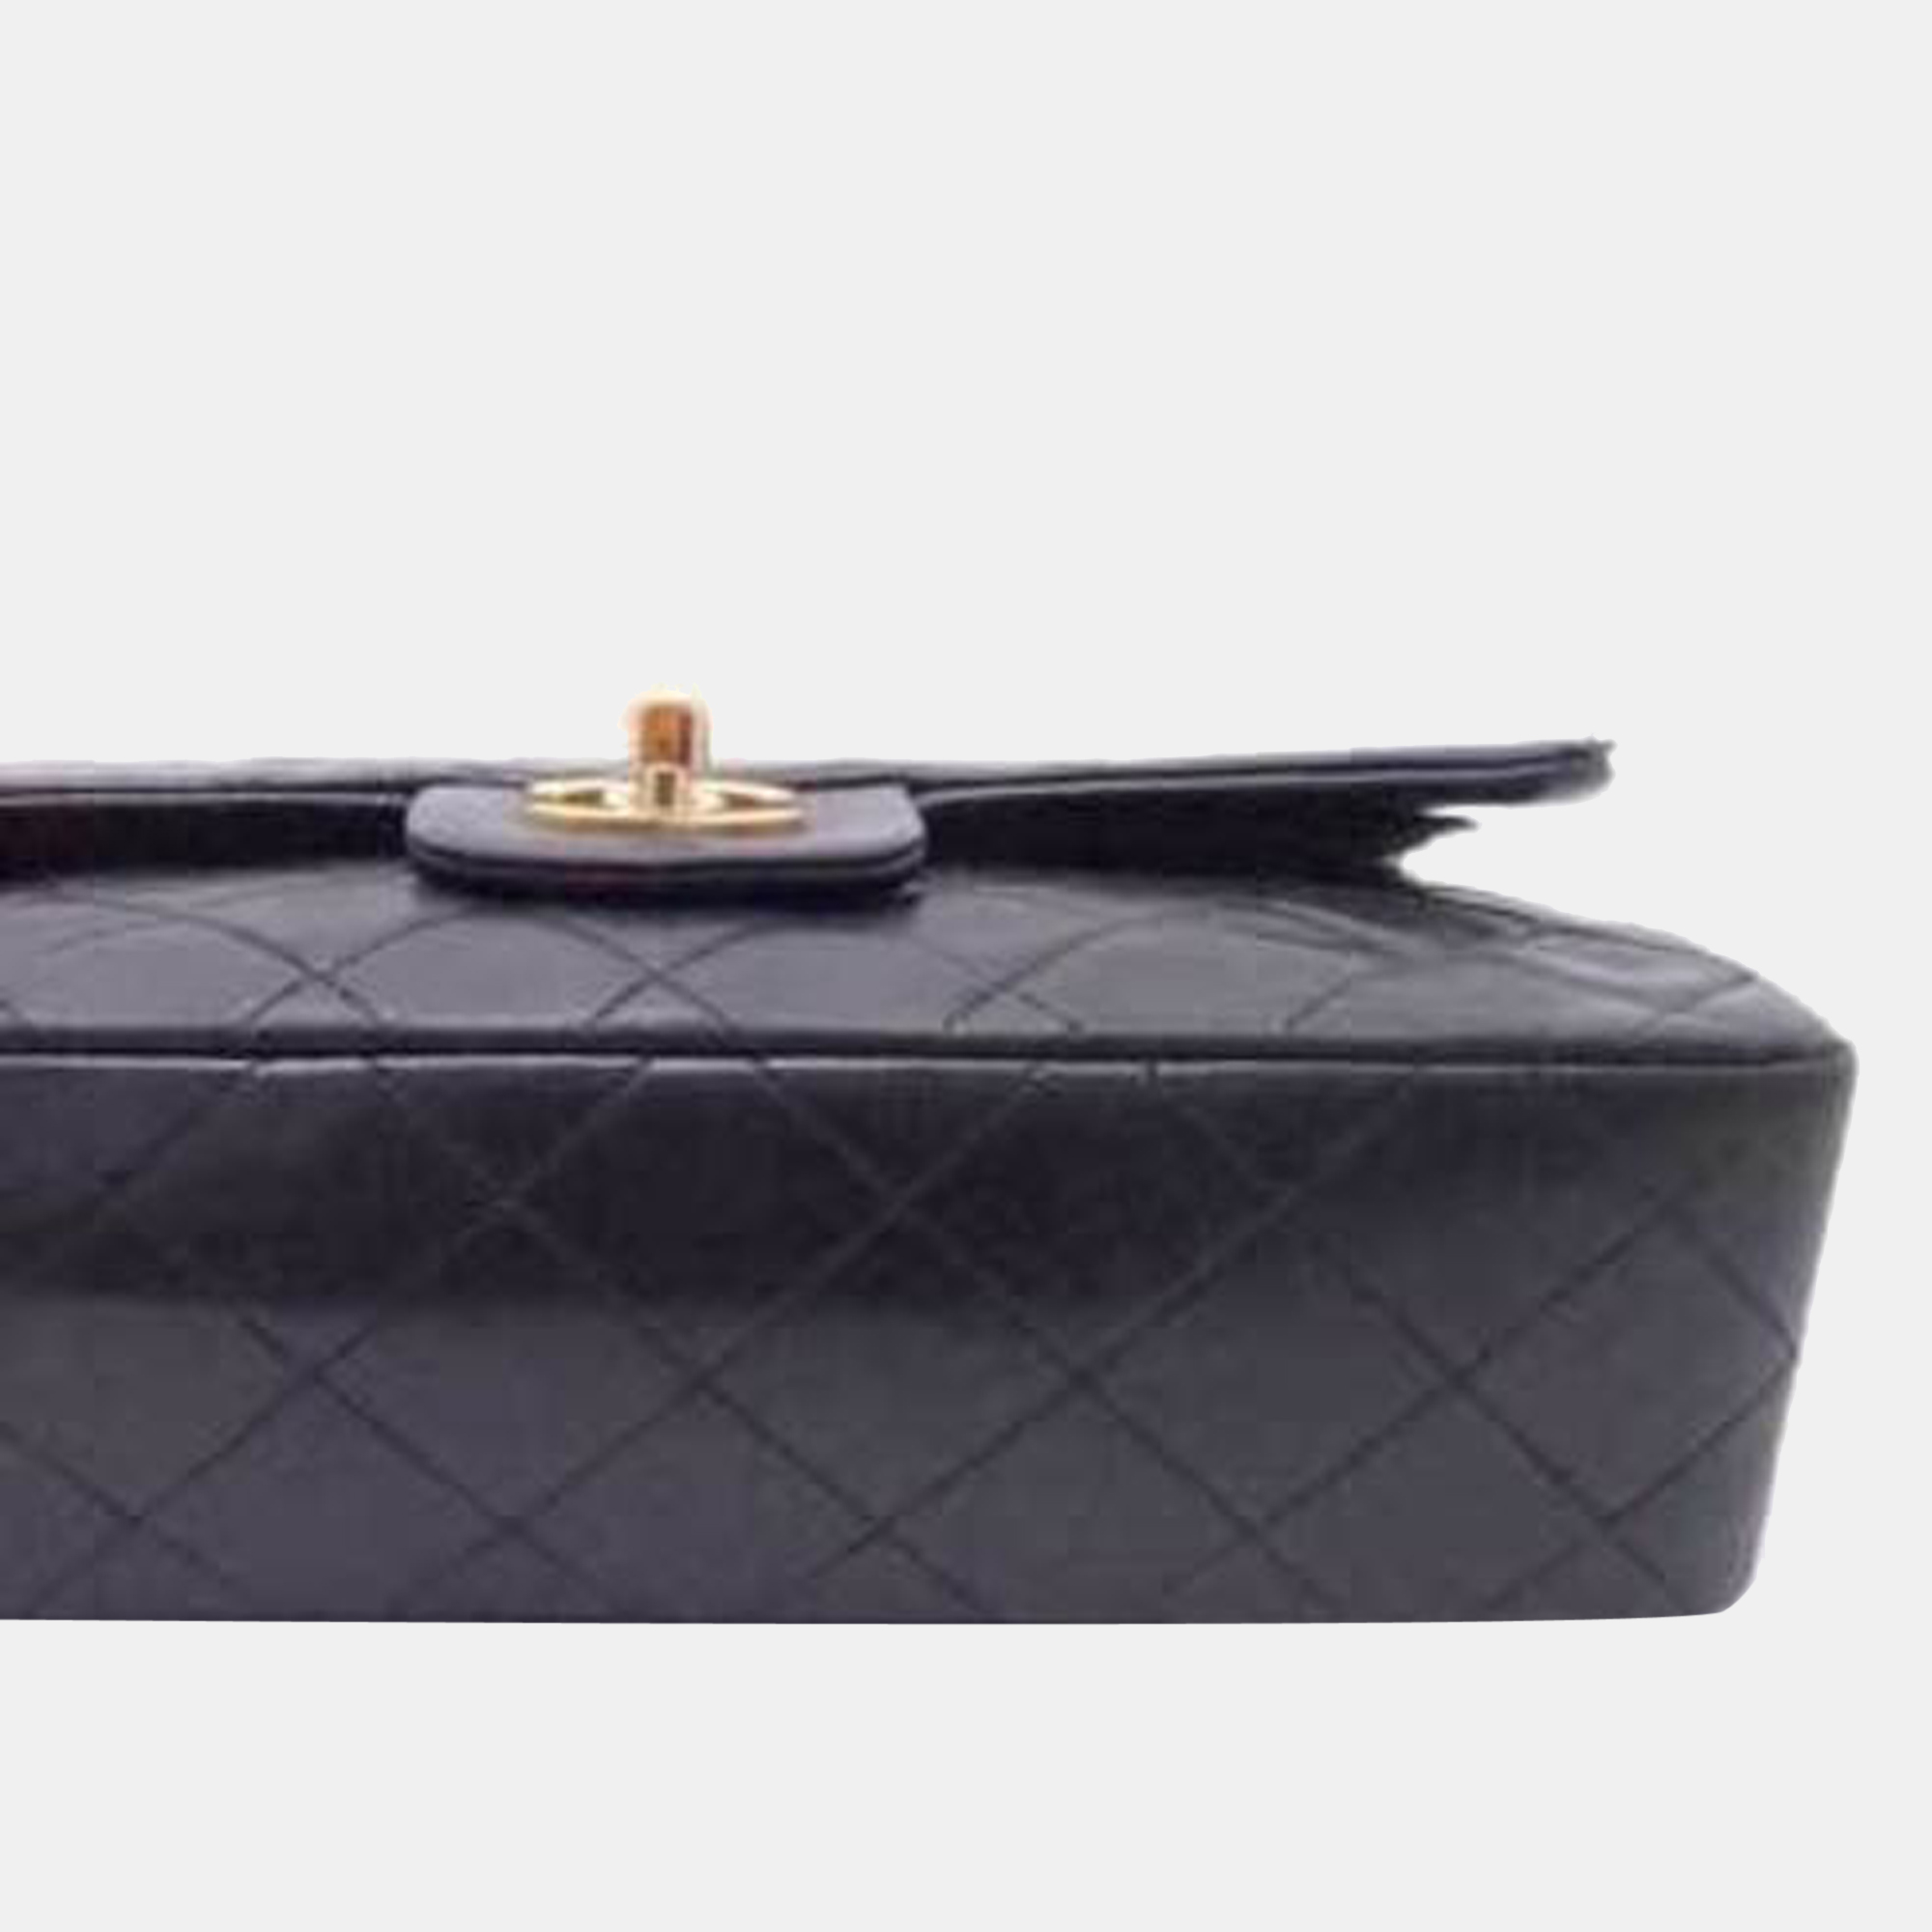 Chanel Black Leather Small Classic Double Flap Shoulder Bag